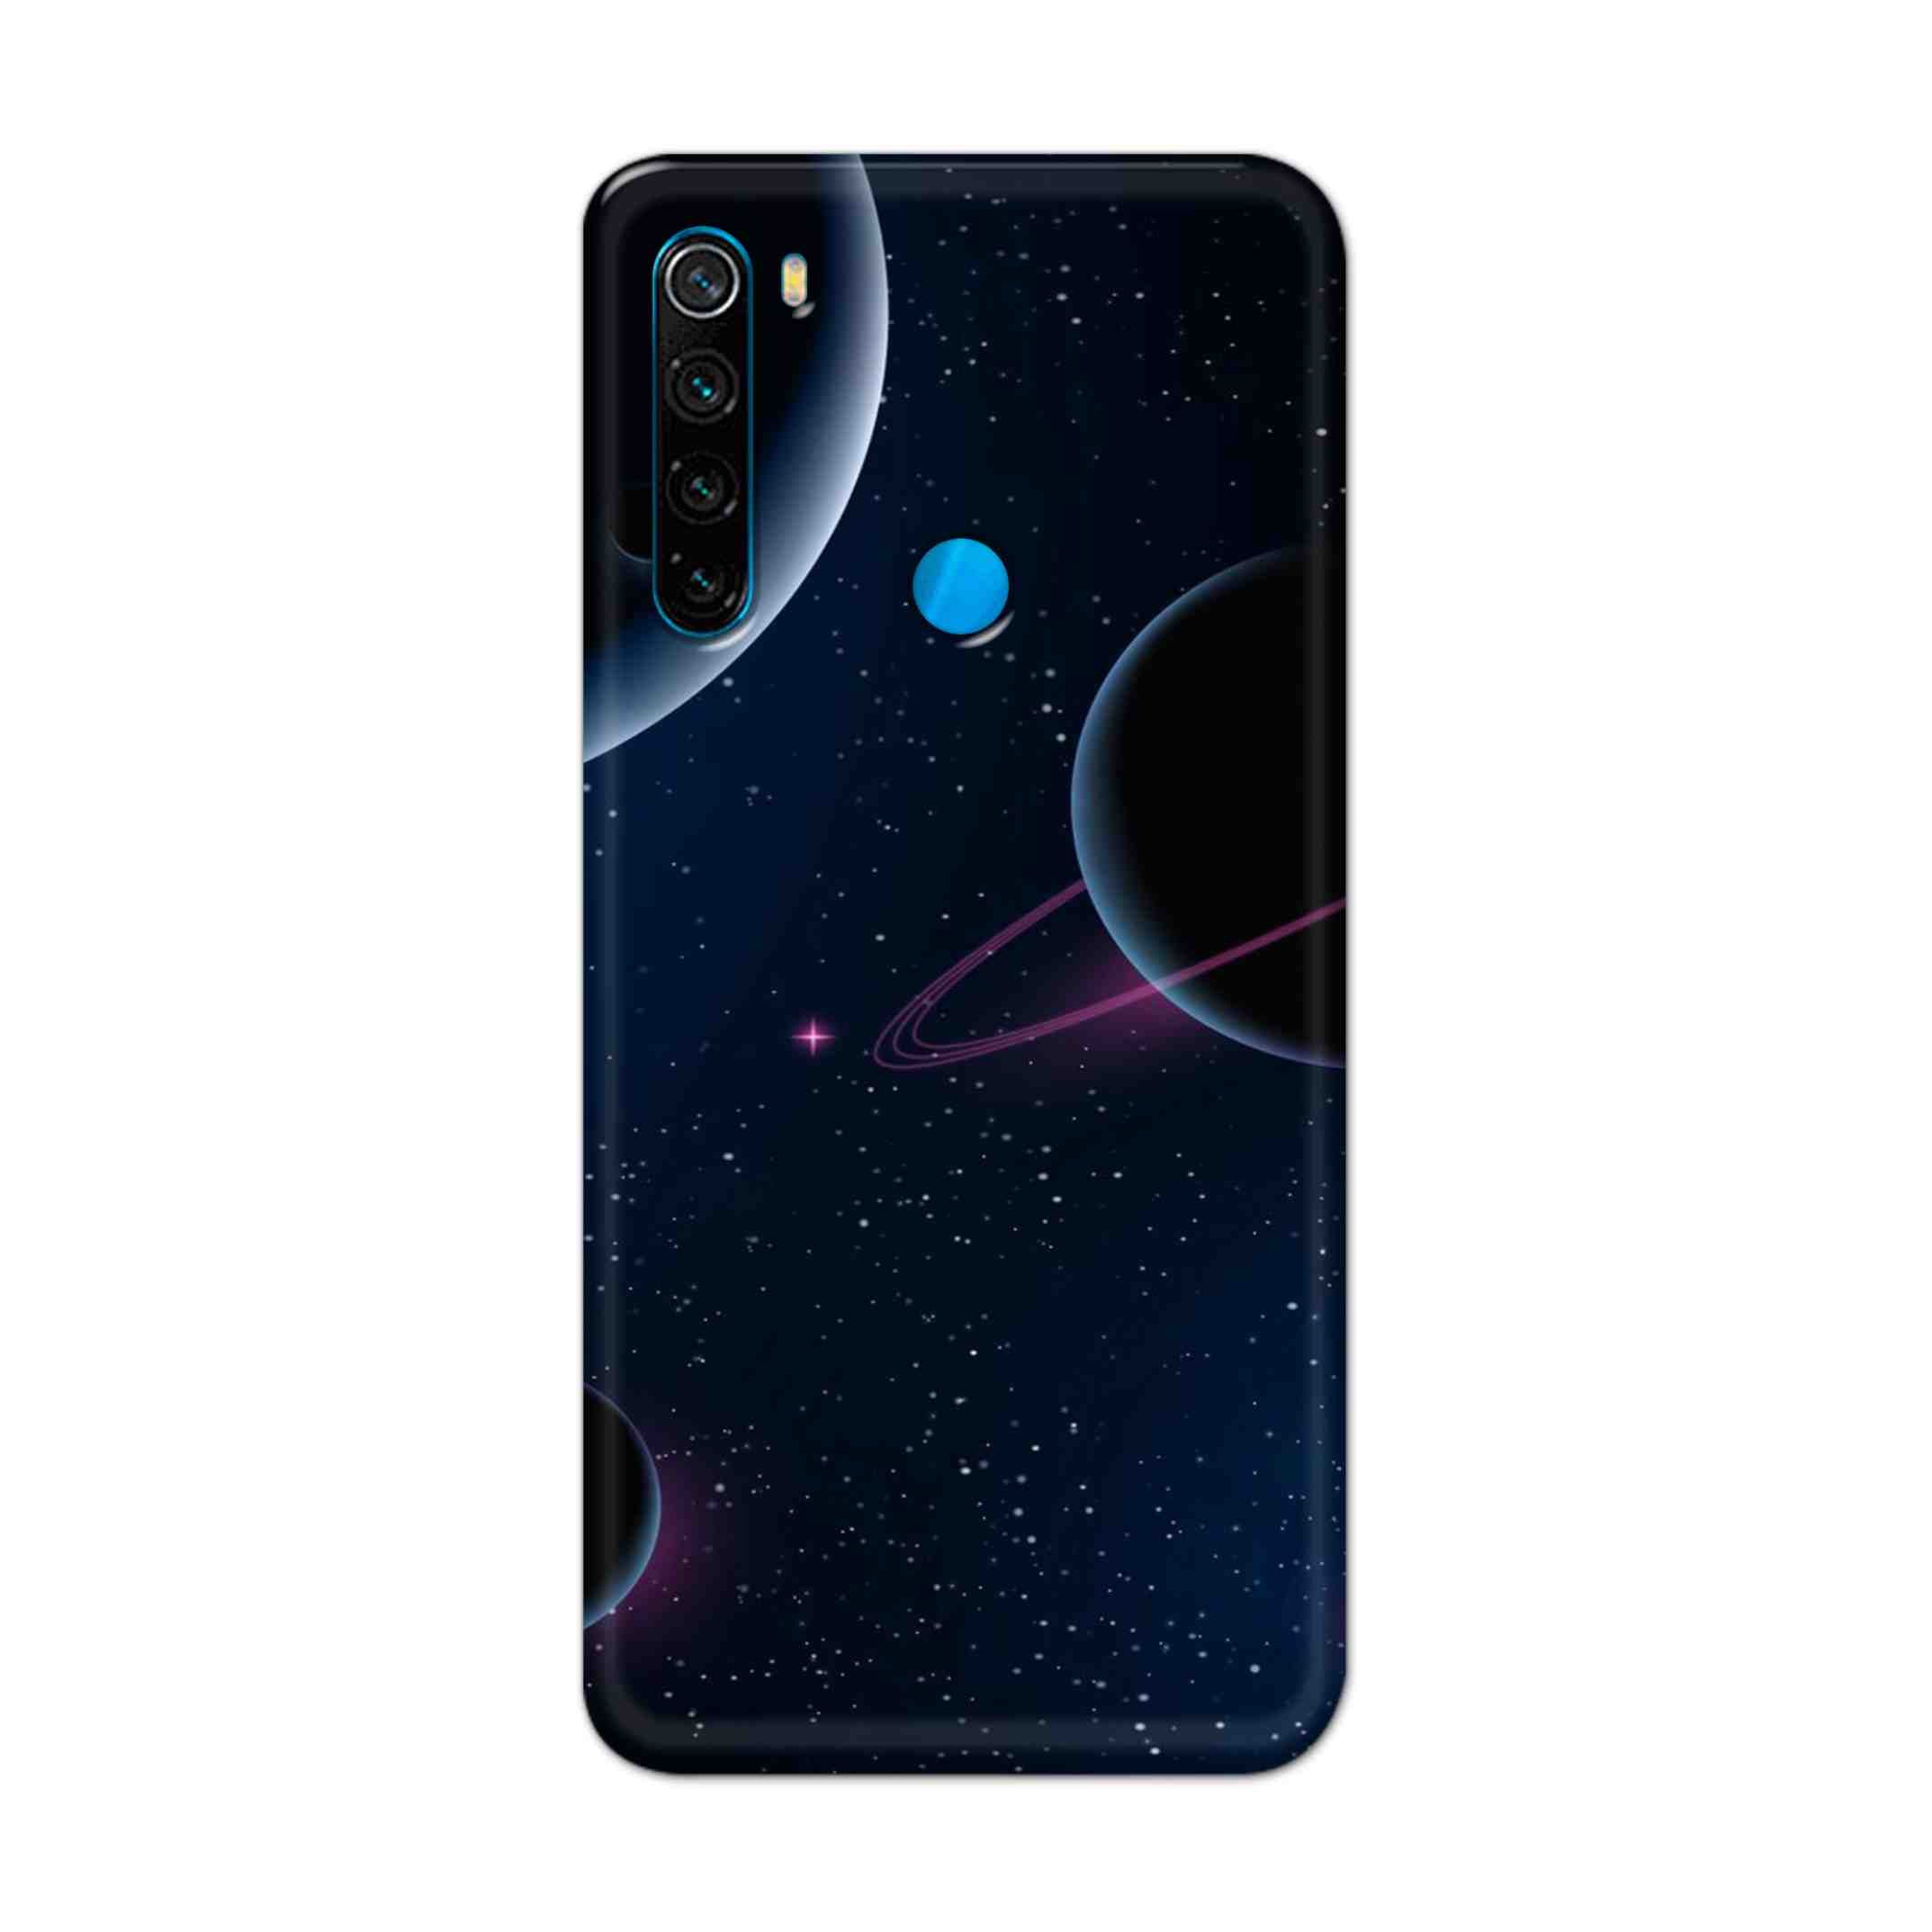 Buy Night Space Hard Back Mobile Phone Case Cover For Xiaomi Redmi Note 8 Online